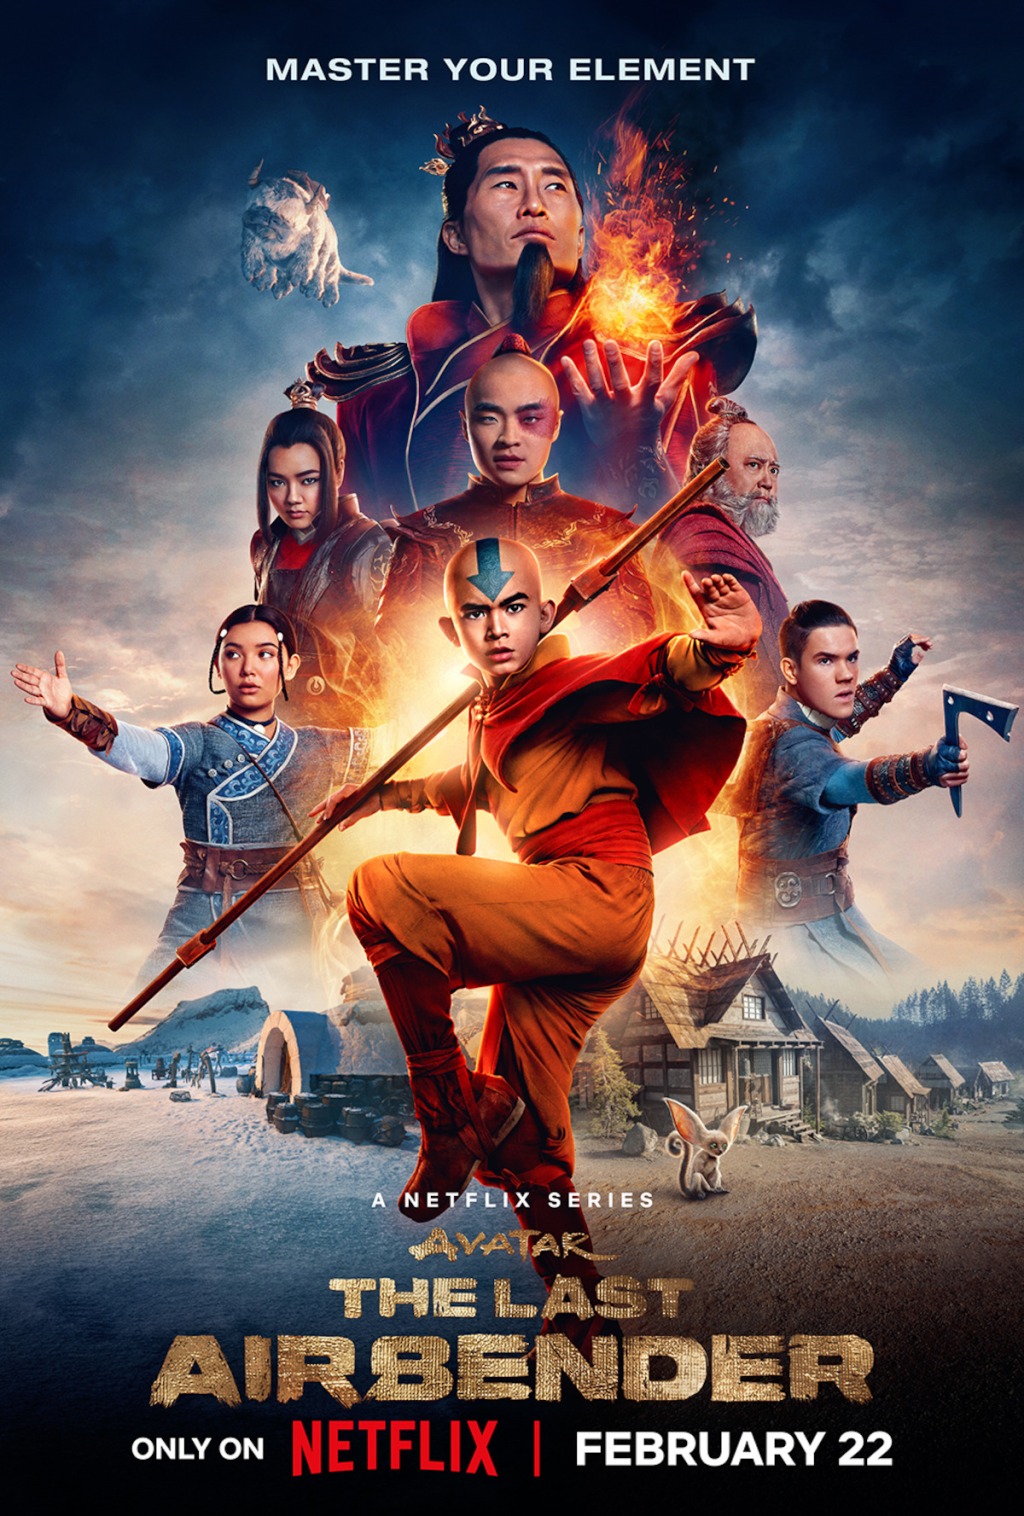 The Problem With Netflix’s Avatar: The Last Airbender